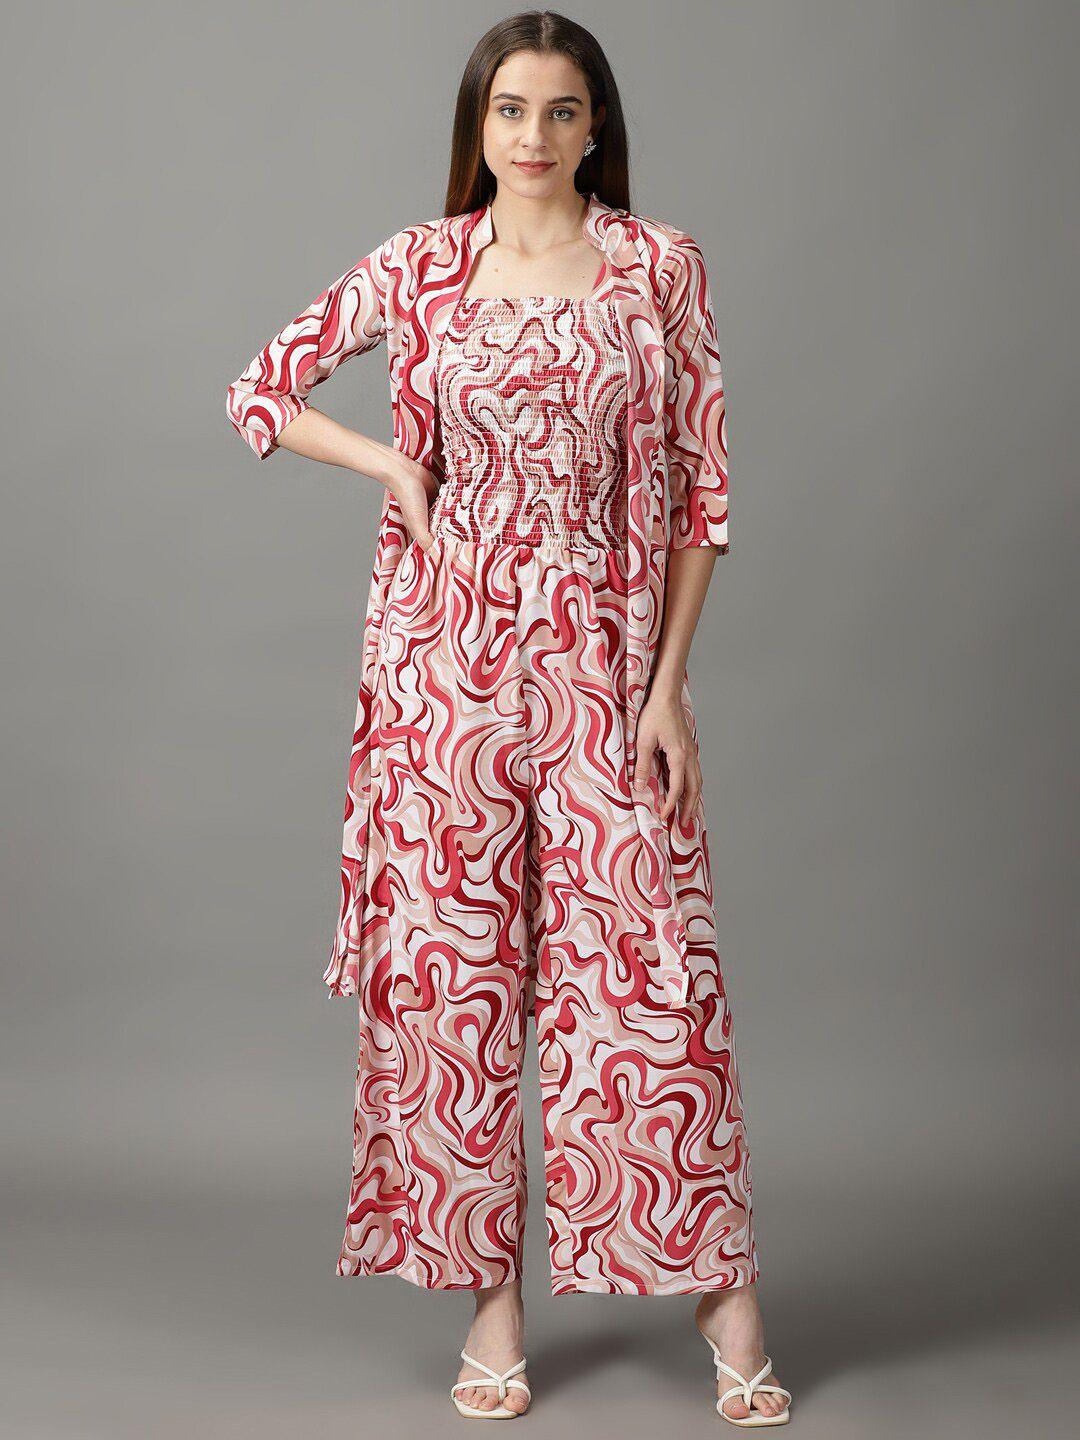 showoff printed basic jumpsuit with over coat